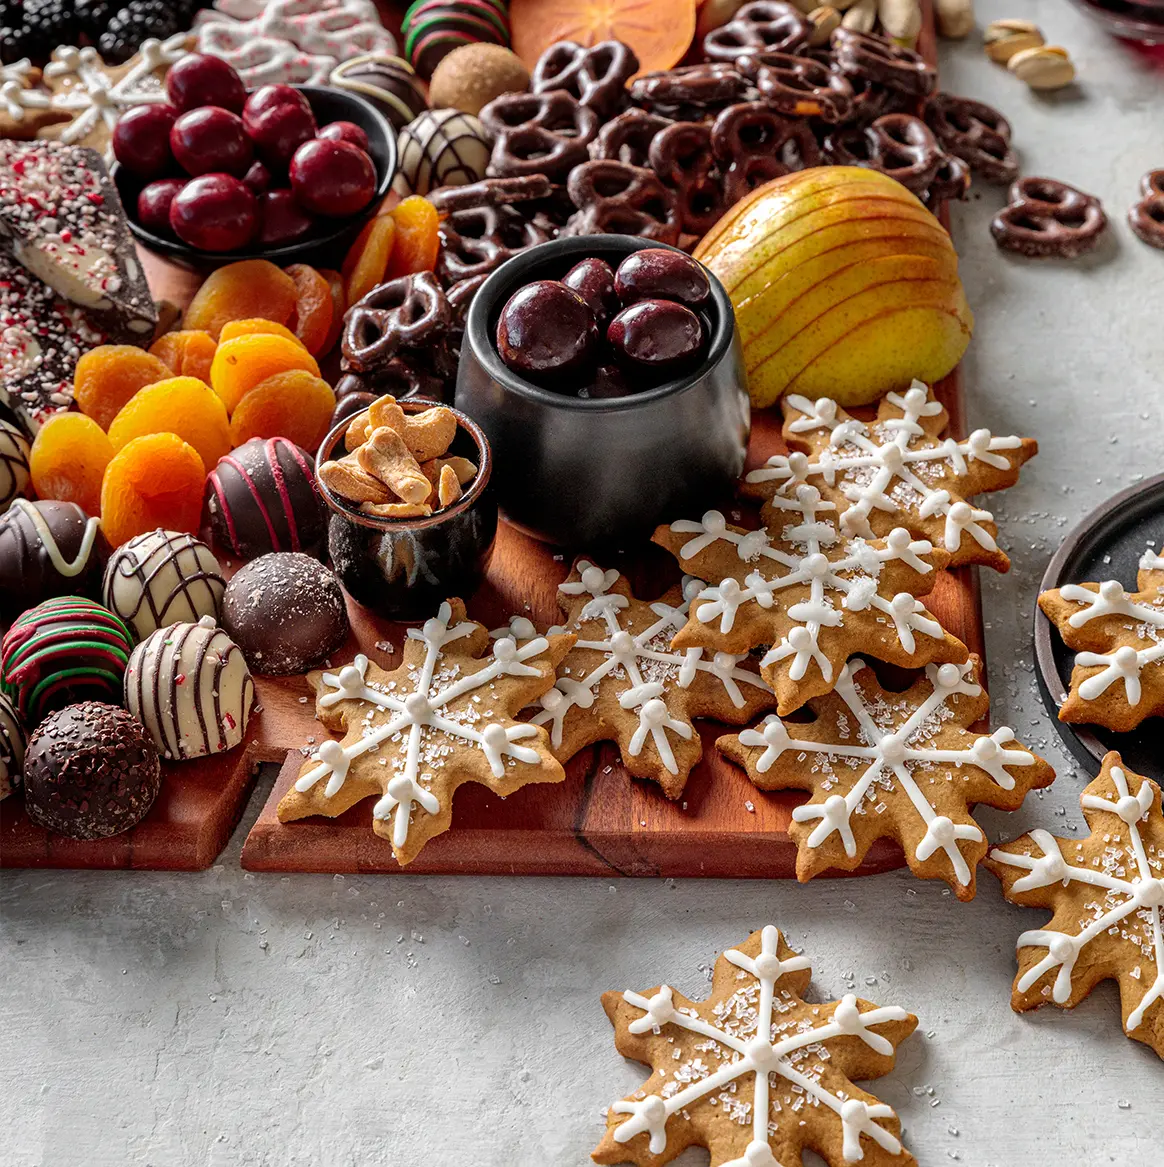 A photo of a dessert board with ginger bread cookies, fruit, nuts and chocolate